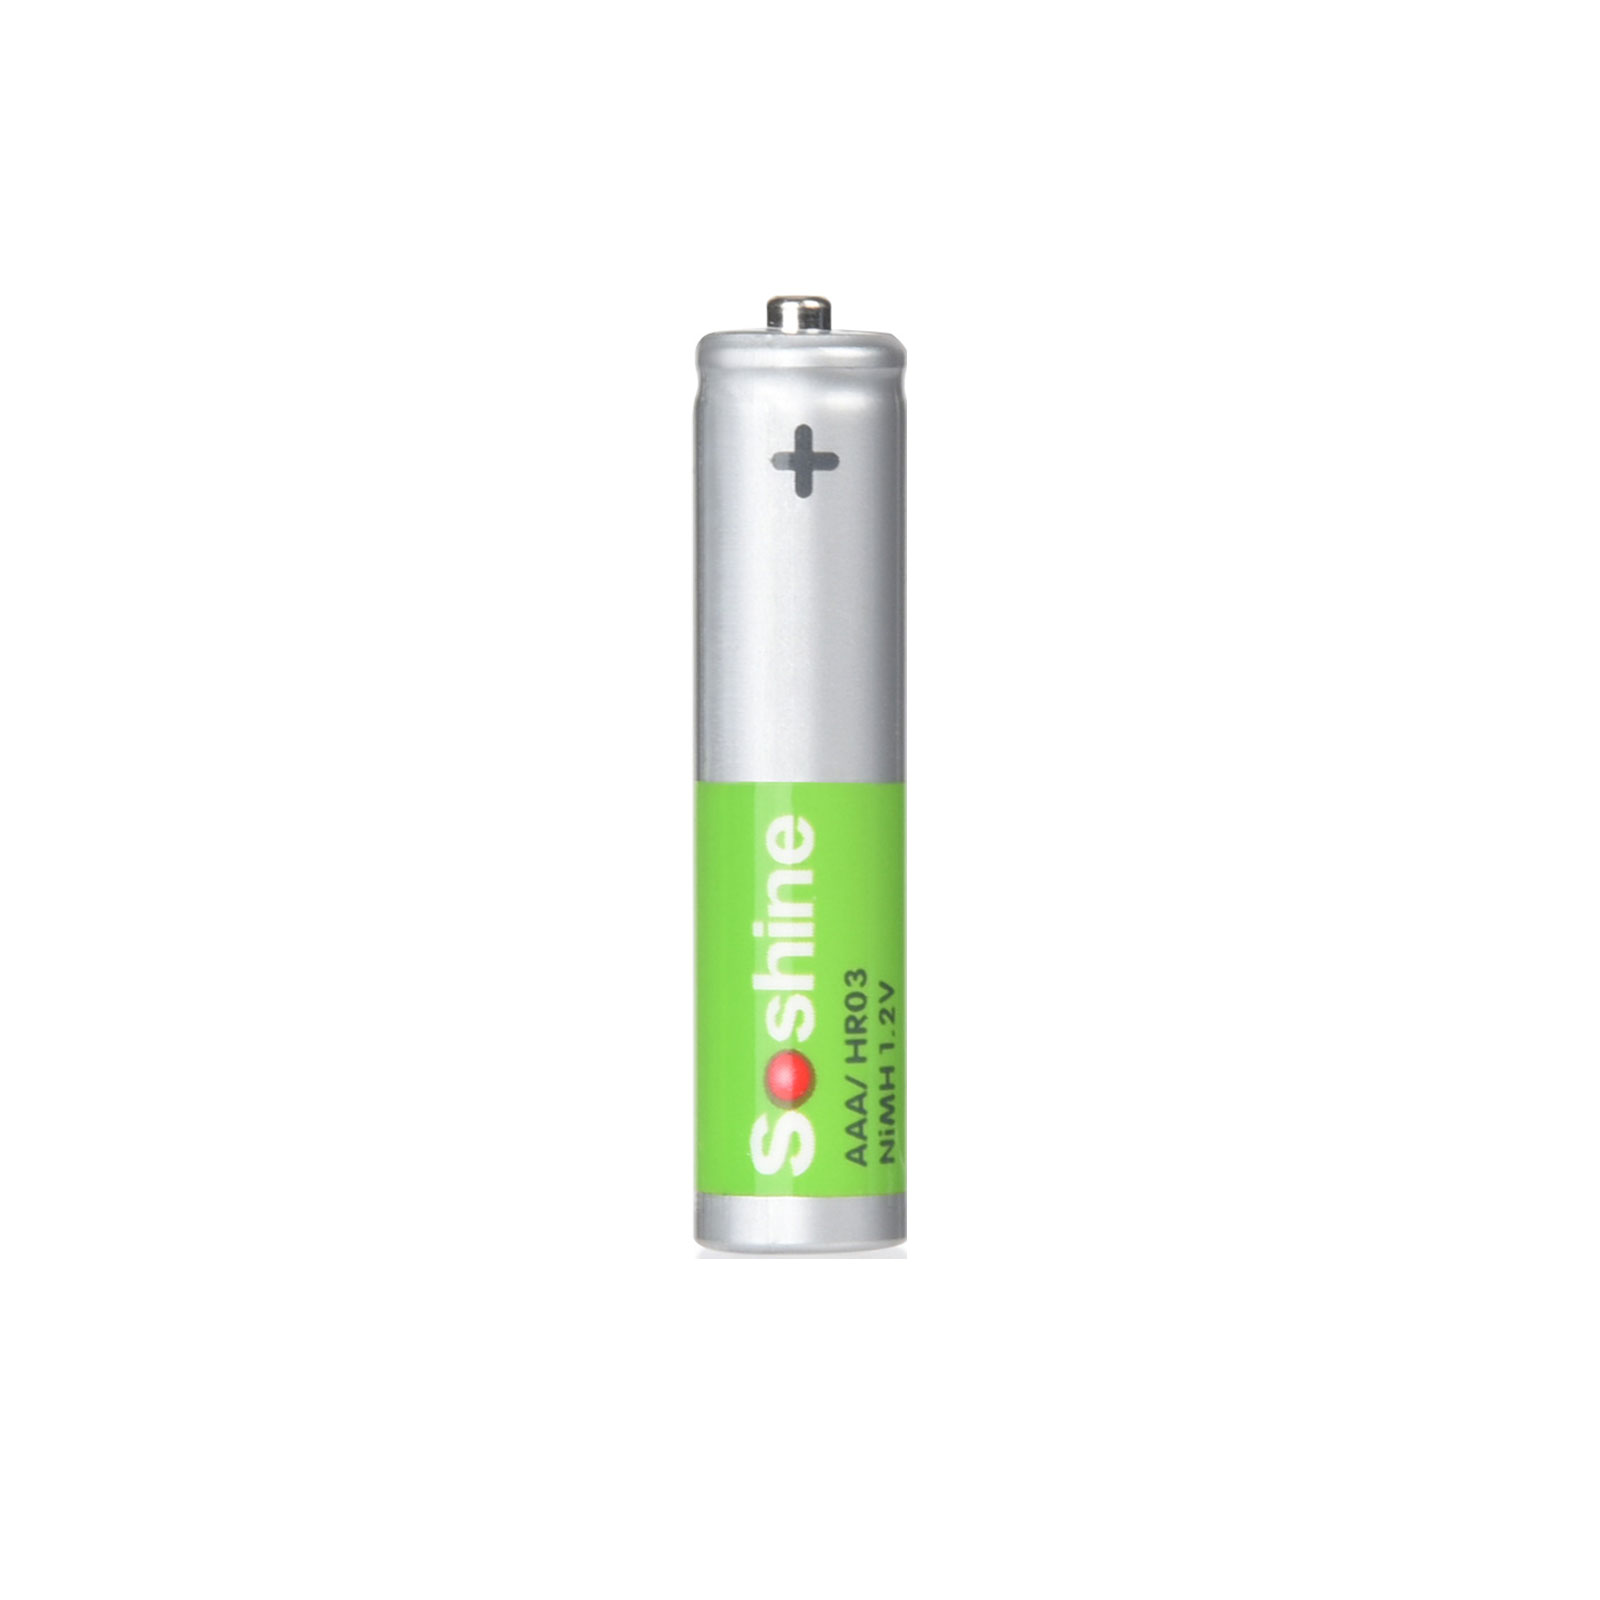 Soshine AAA NiMH Battery Rechargeable Batteries Low Self Discharge: 1.2V 500mAh 